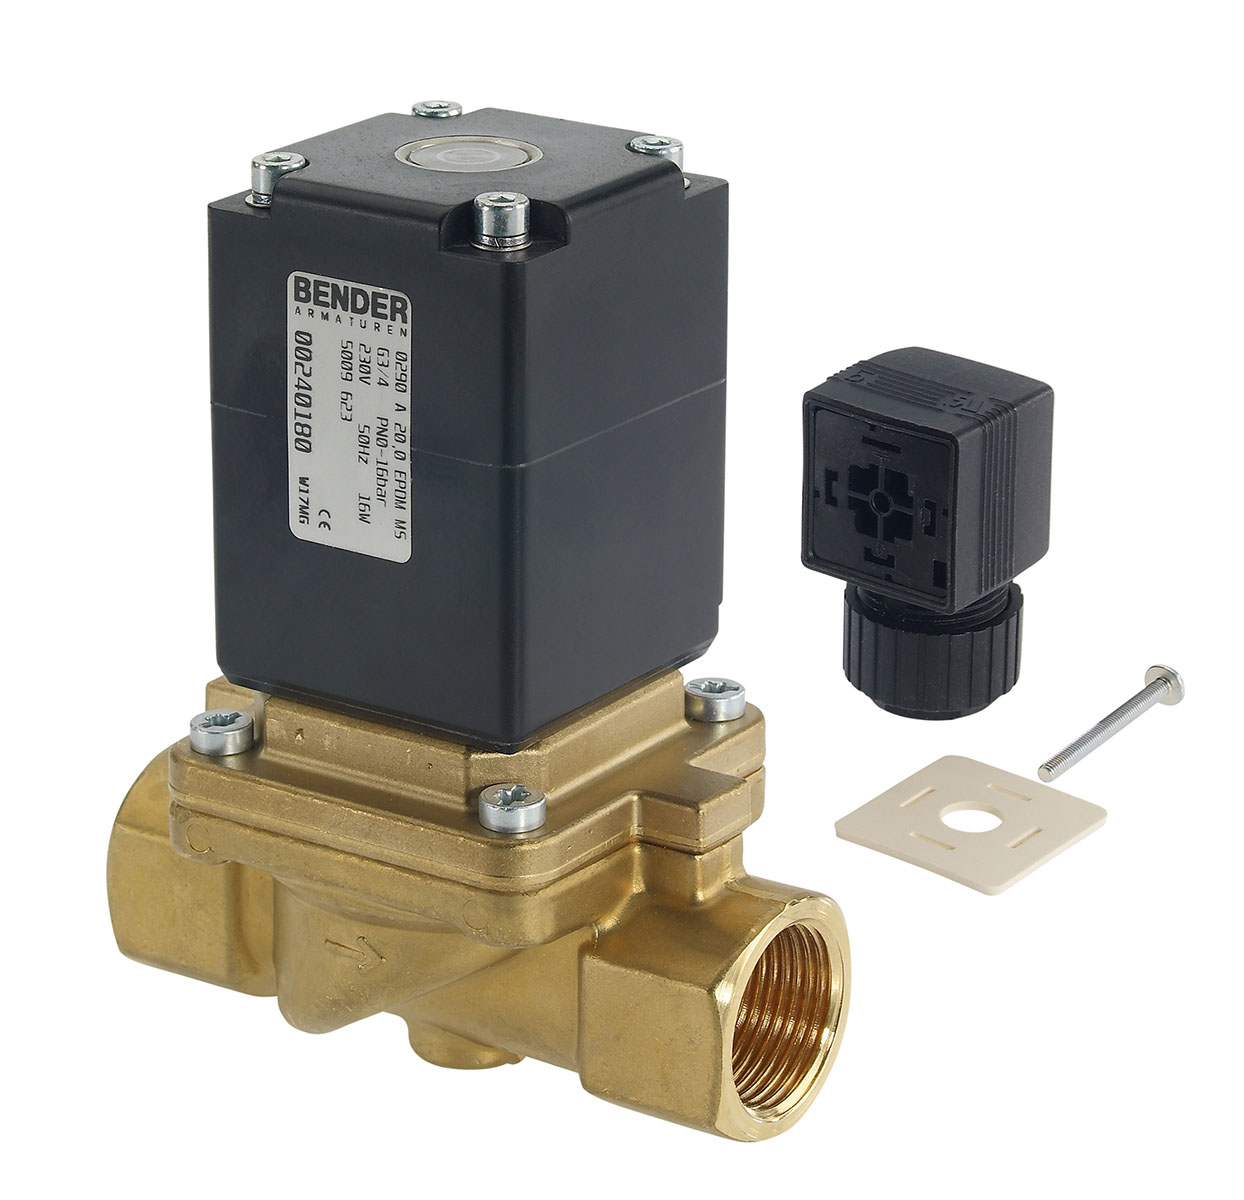 5009625 - 2/2 way solenoid valve normally closed for not flammable gas and fluids Type 6; female thread